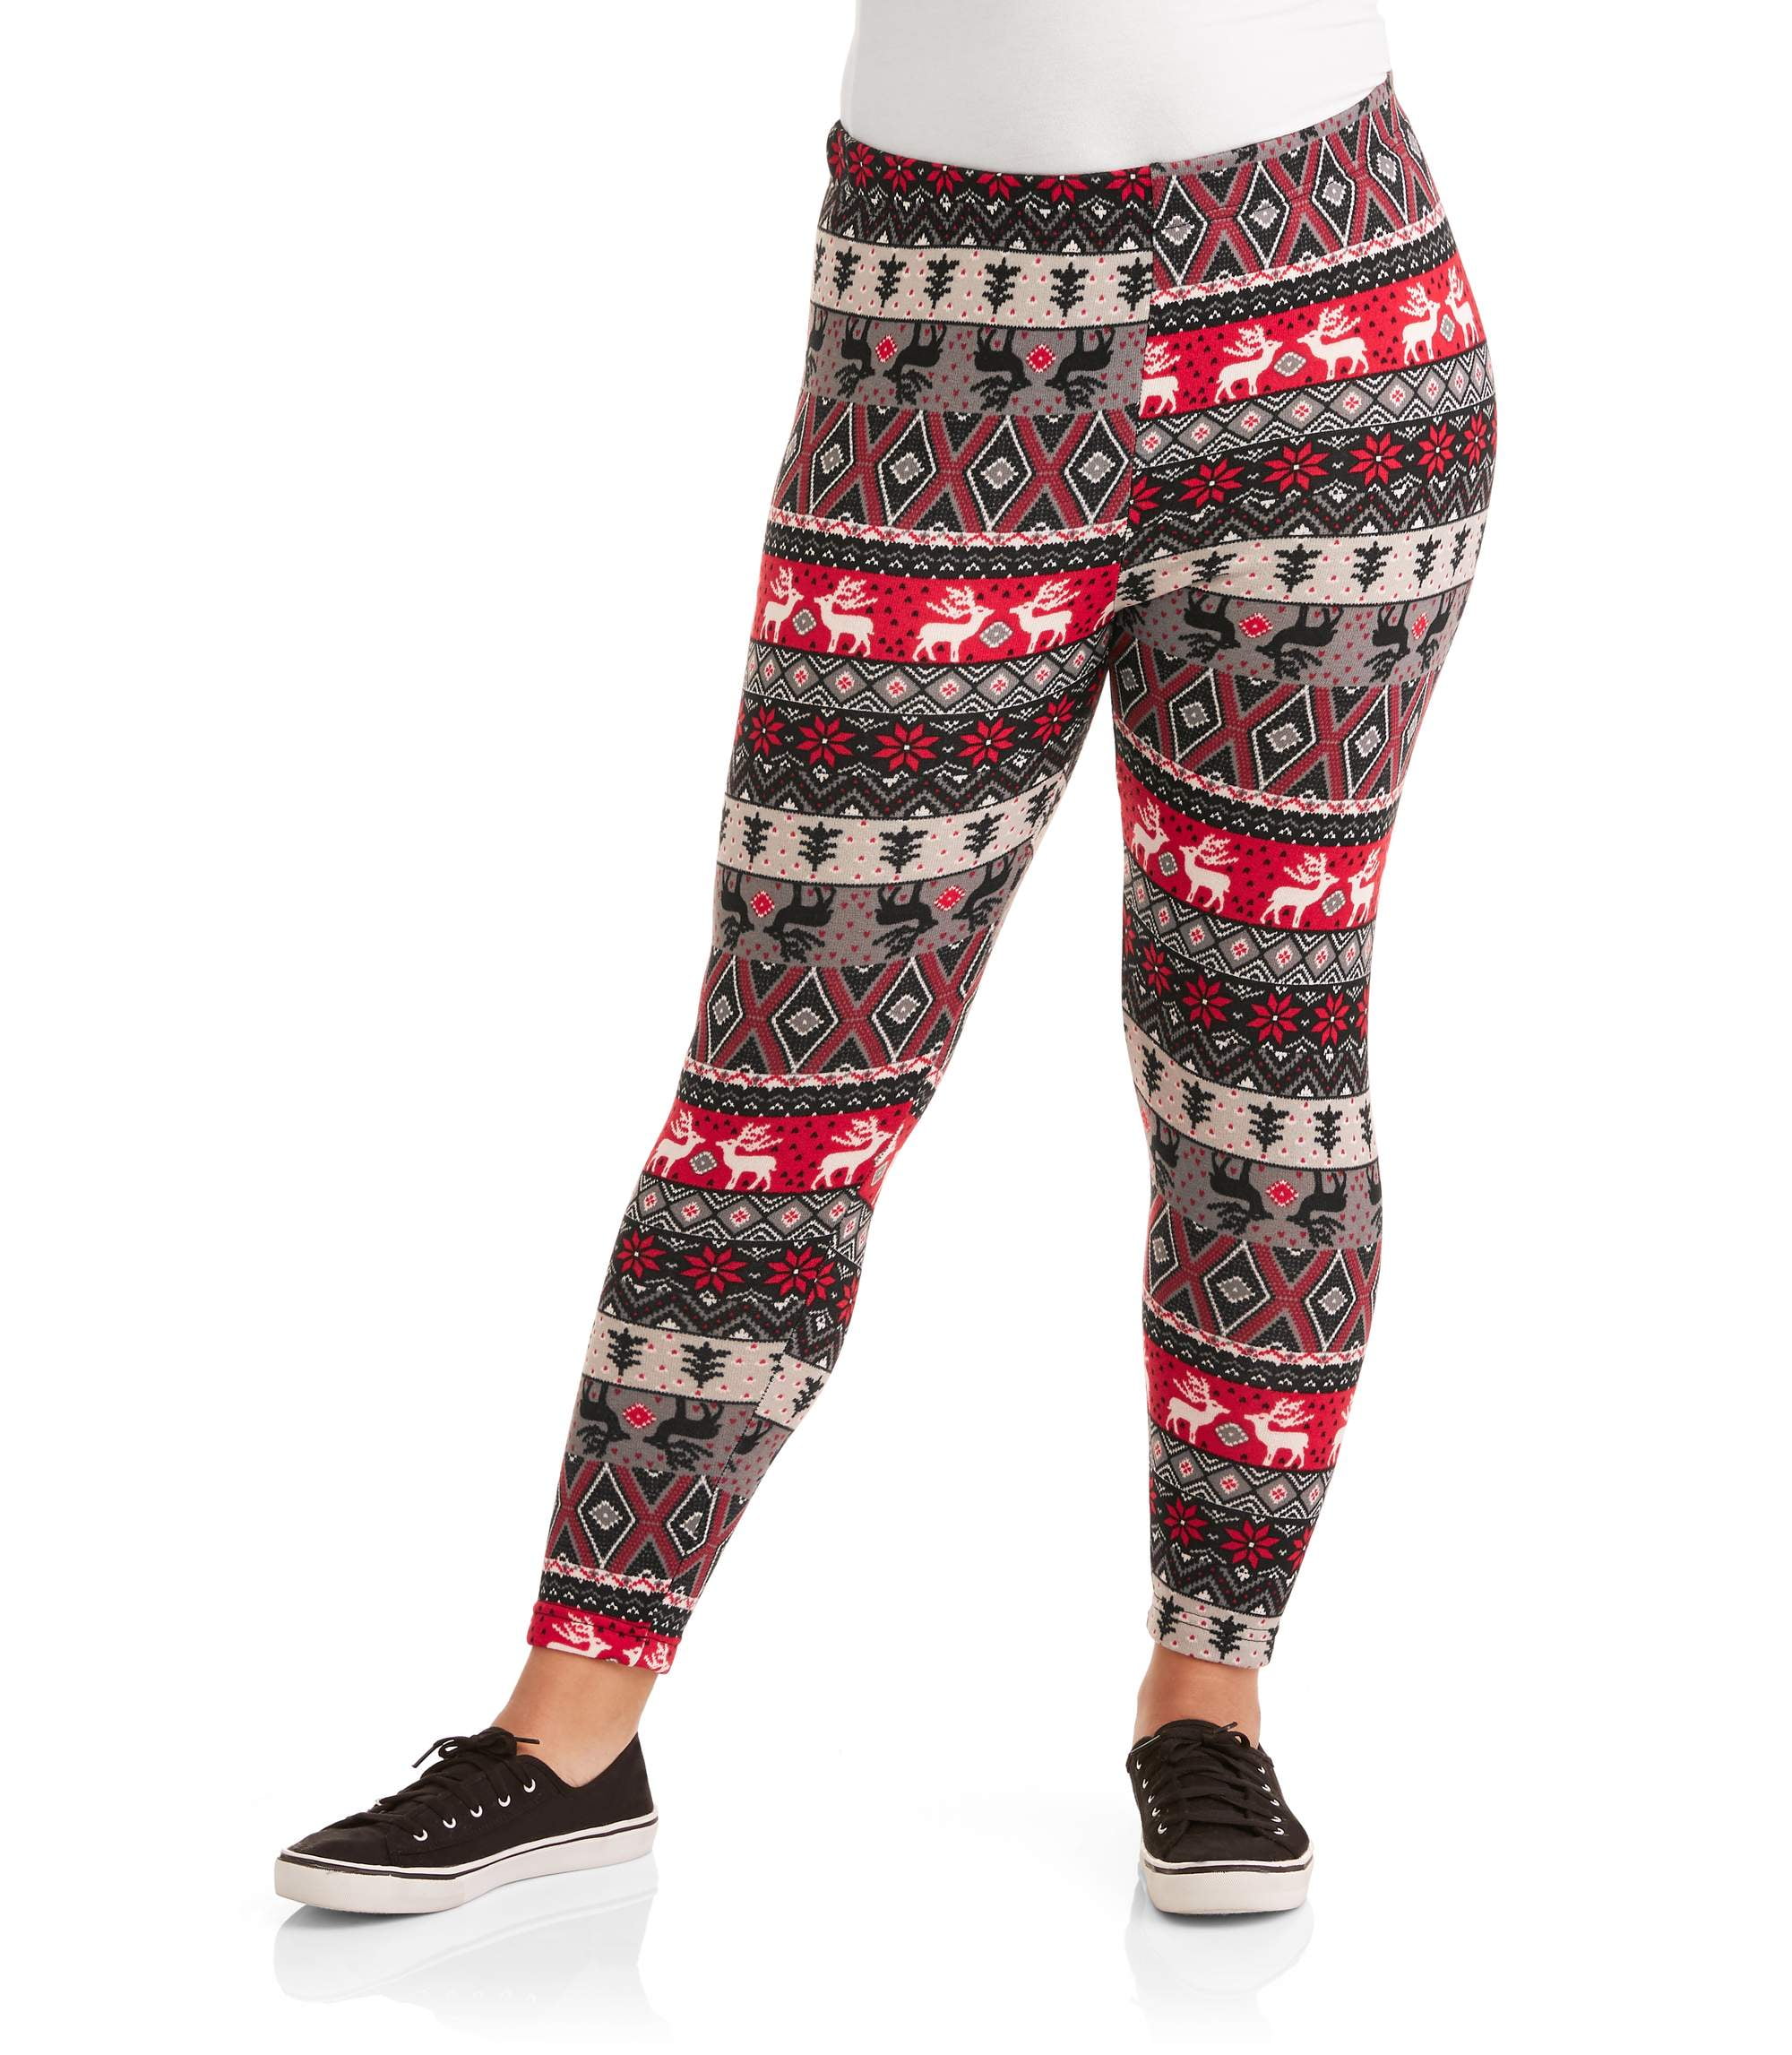 Faded Glory - Women's Plus Fleece Lined Holiday Printed Legging 2 Pack ...